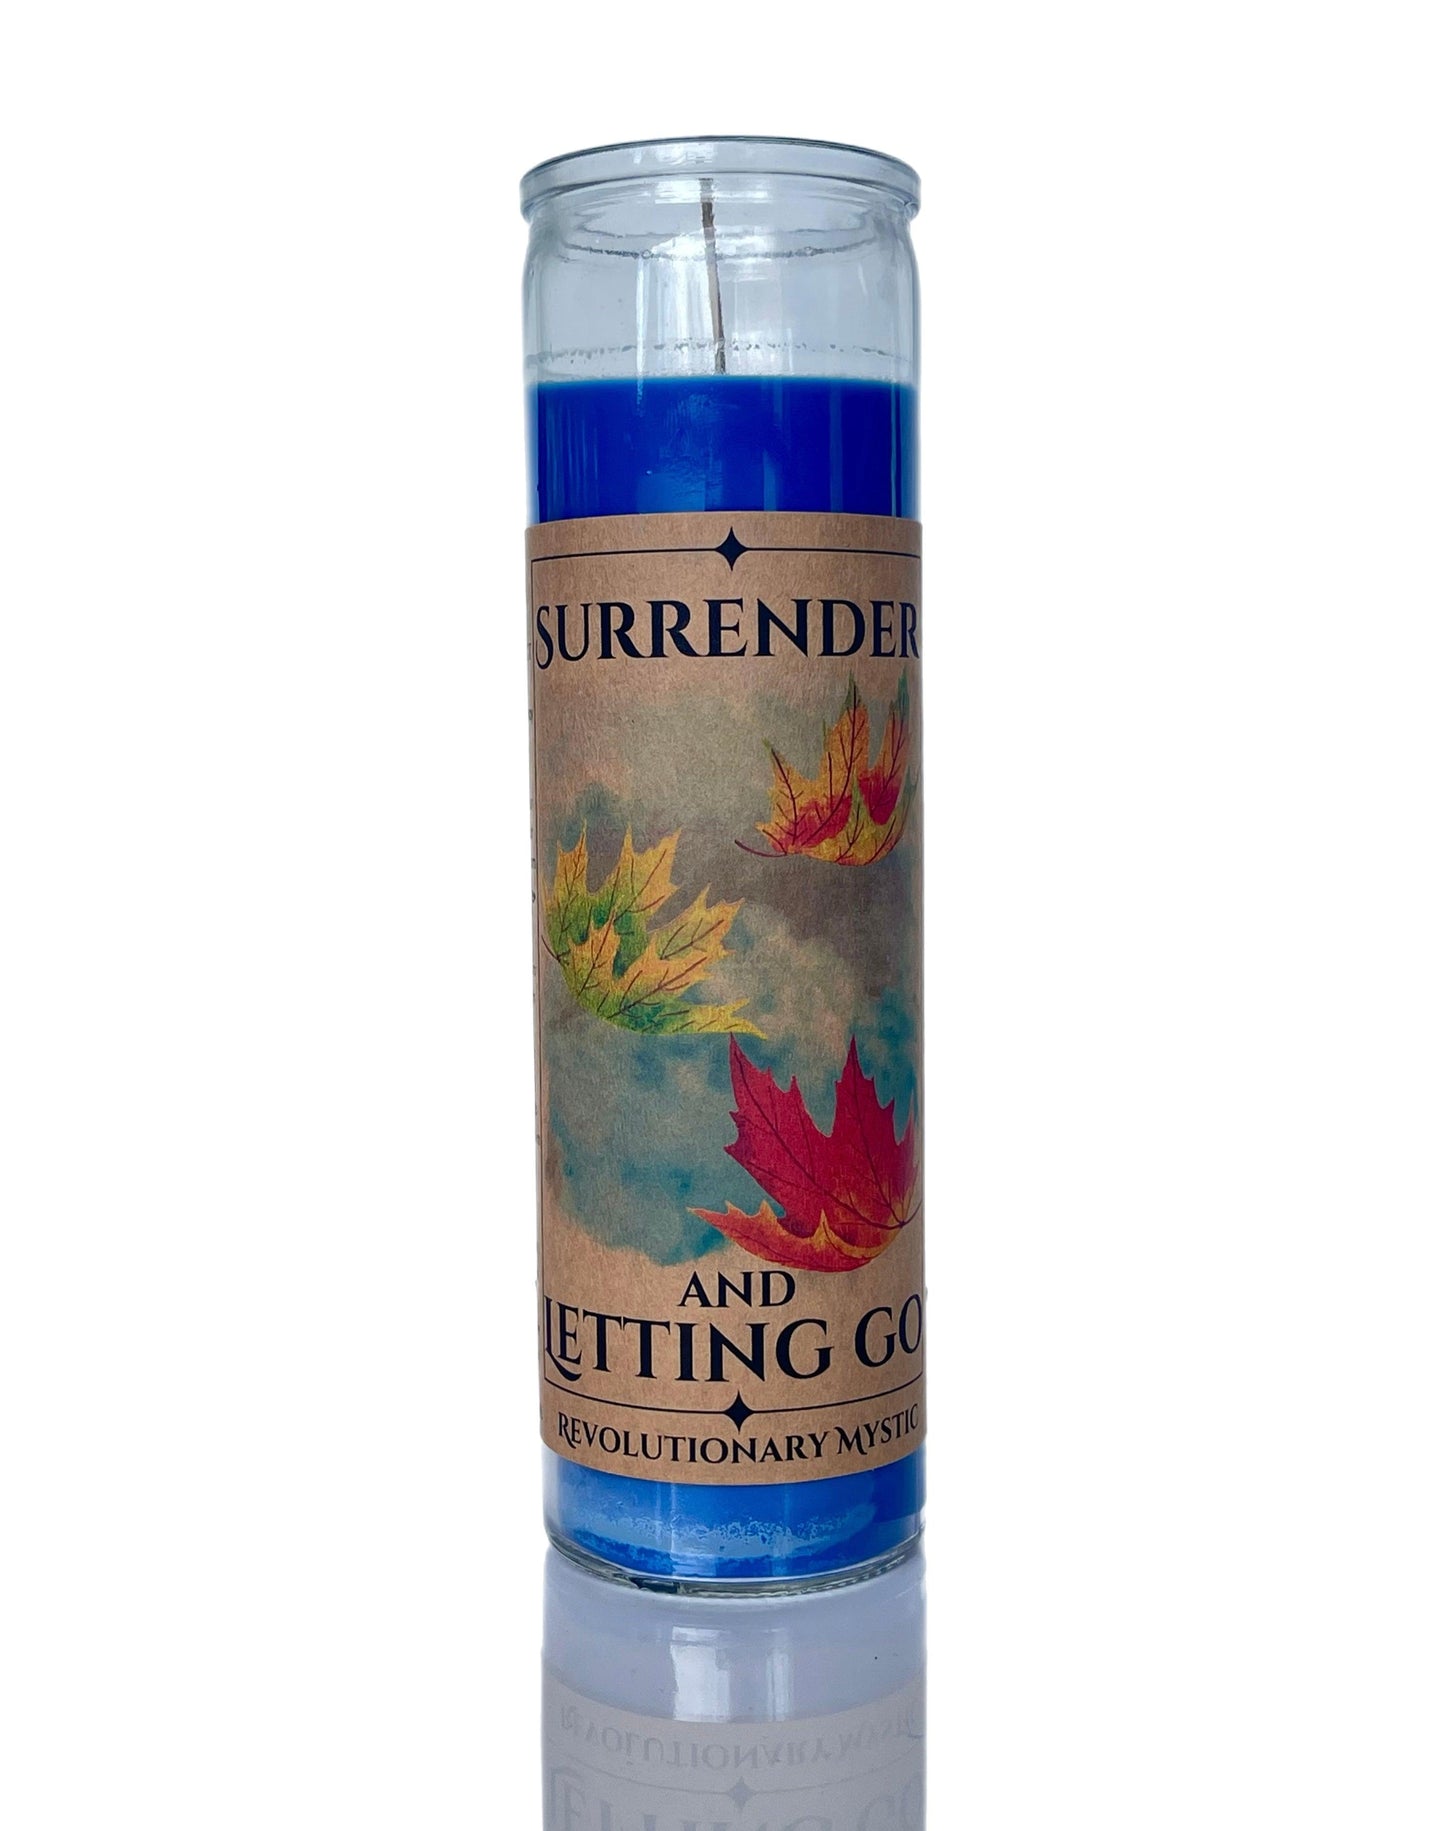 Surrender & Letting Go Candle - Revolutionary Mystic